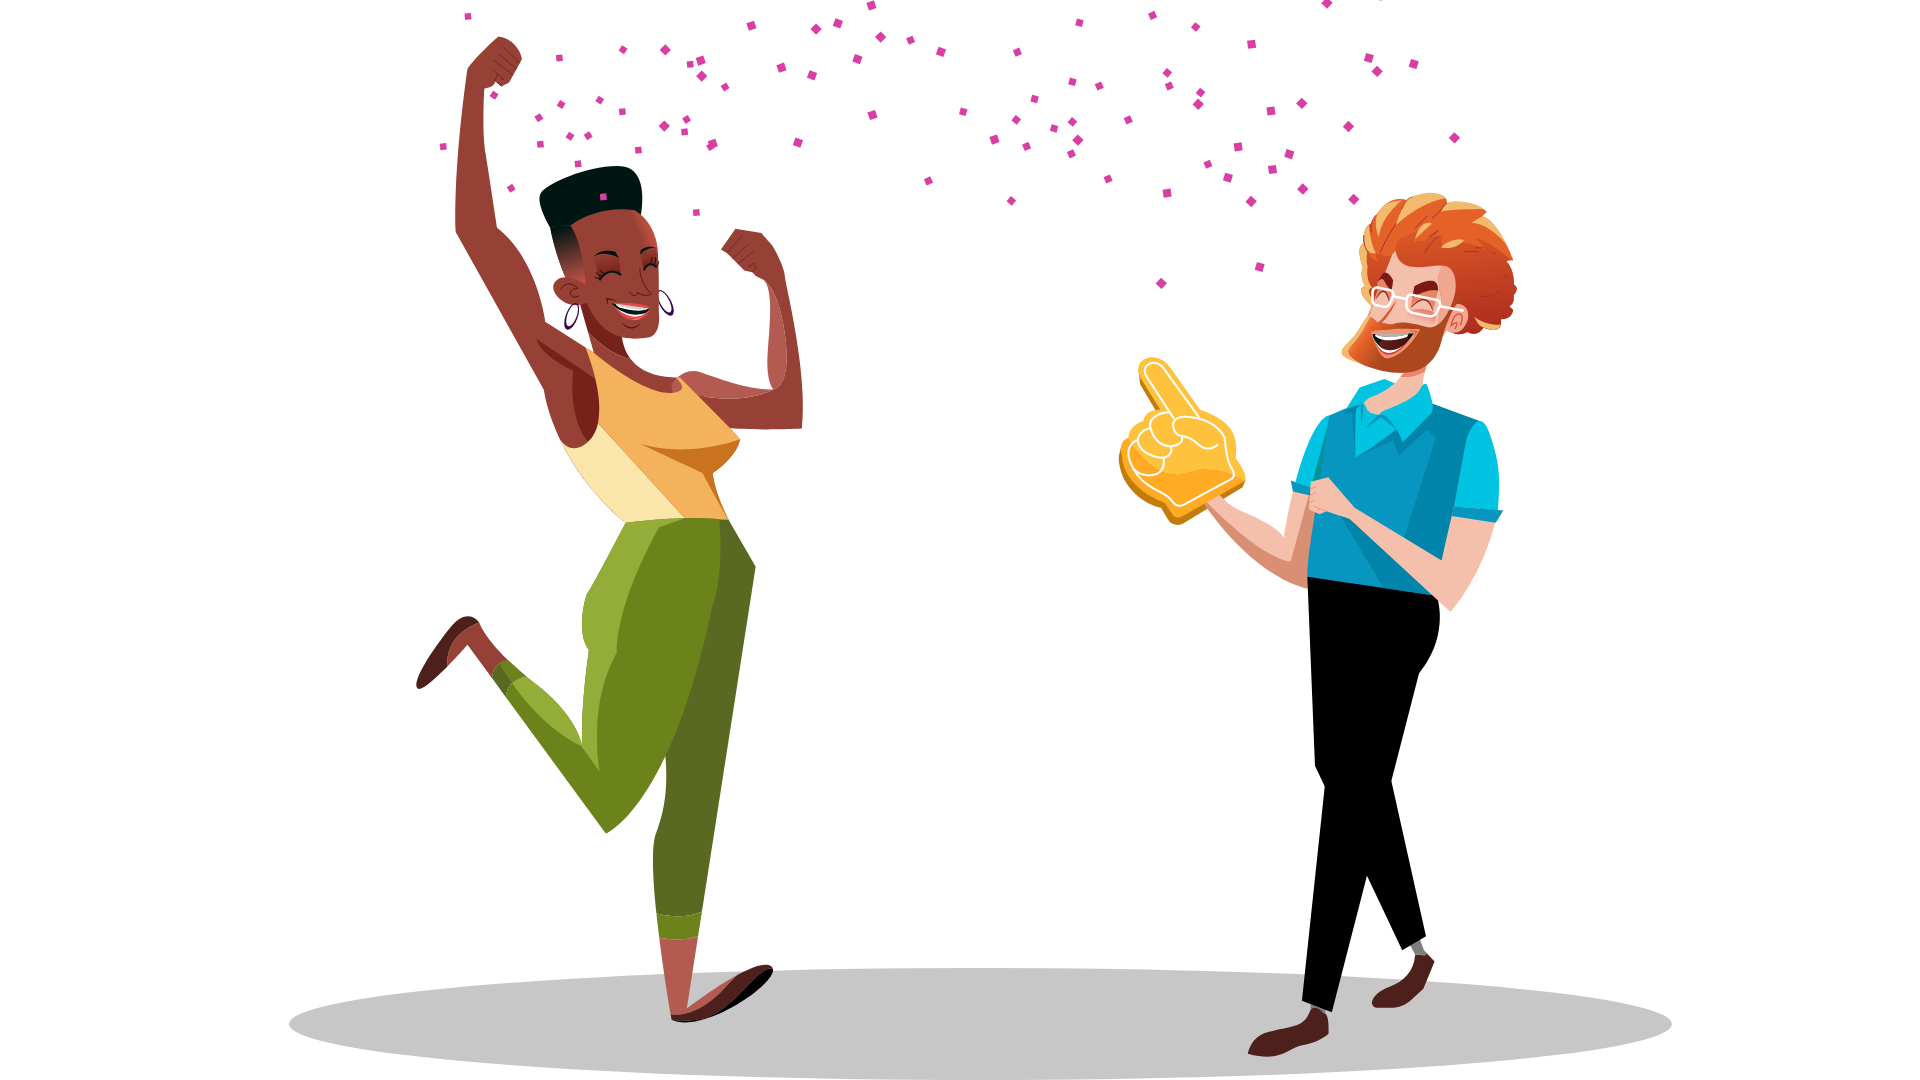 Two people laughing, cheering, and celebrating with confetti. Illustration.